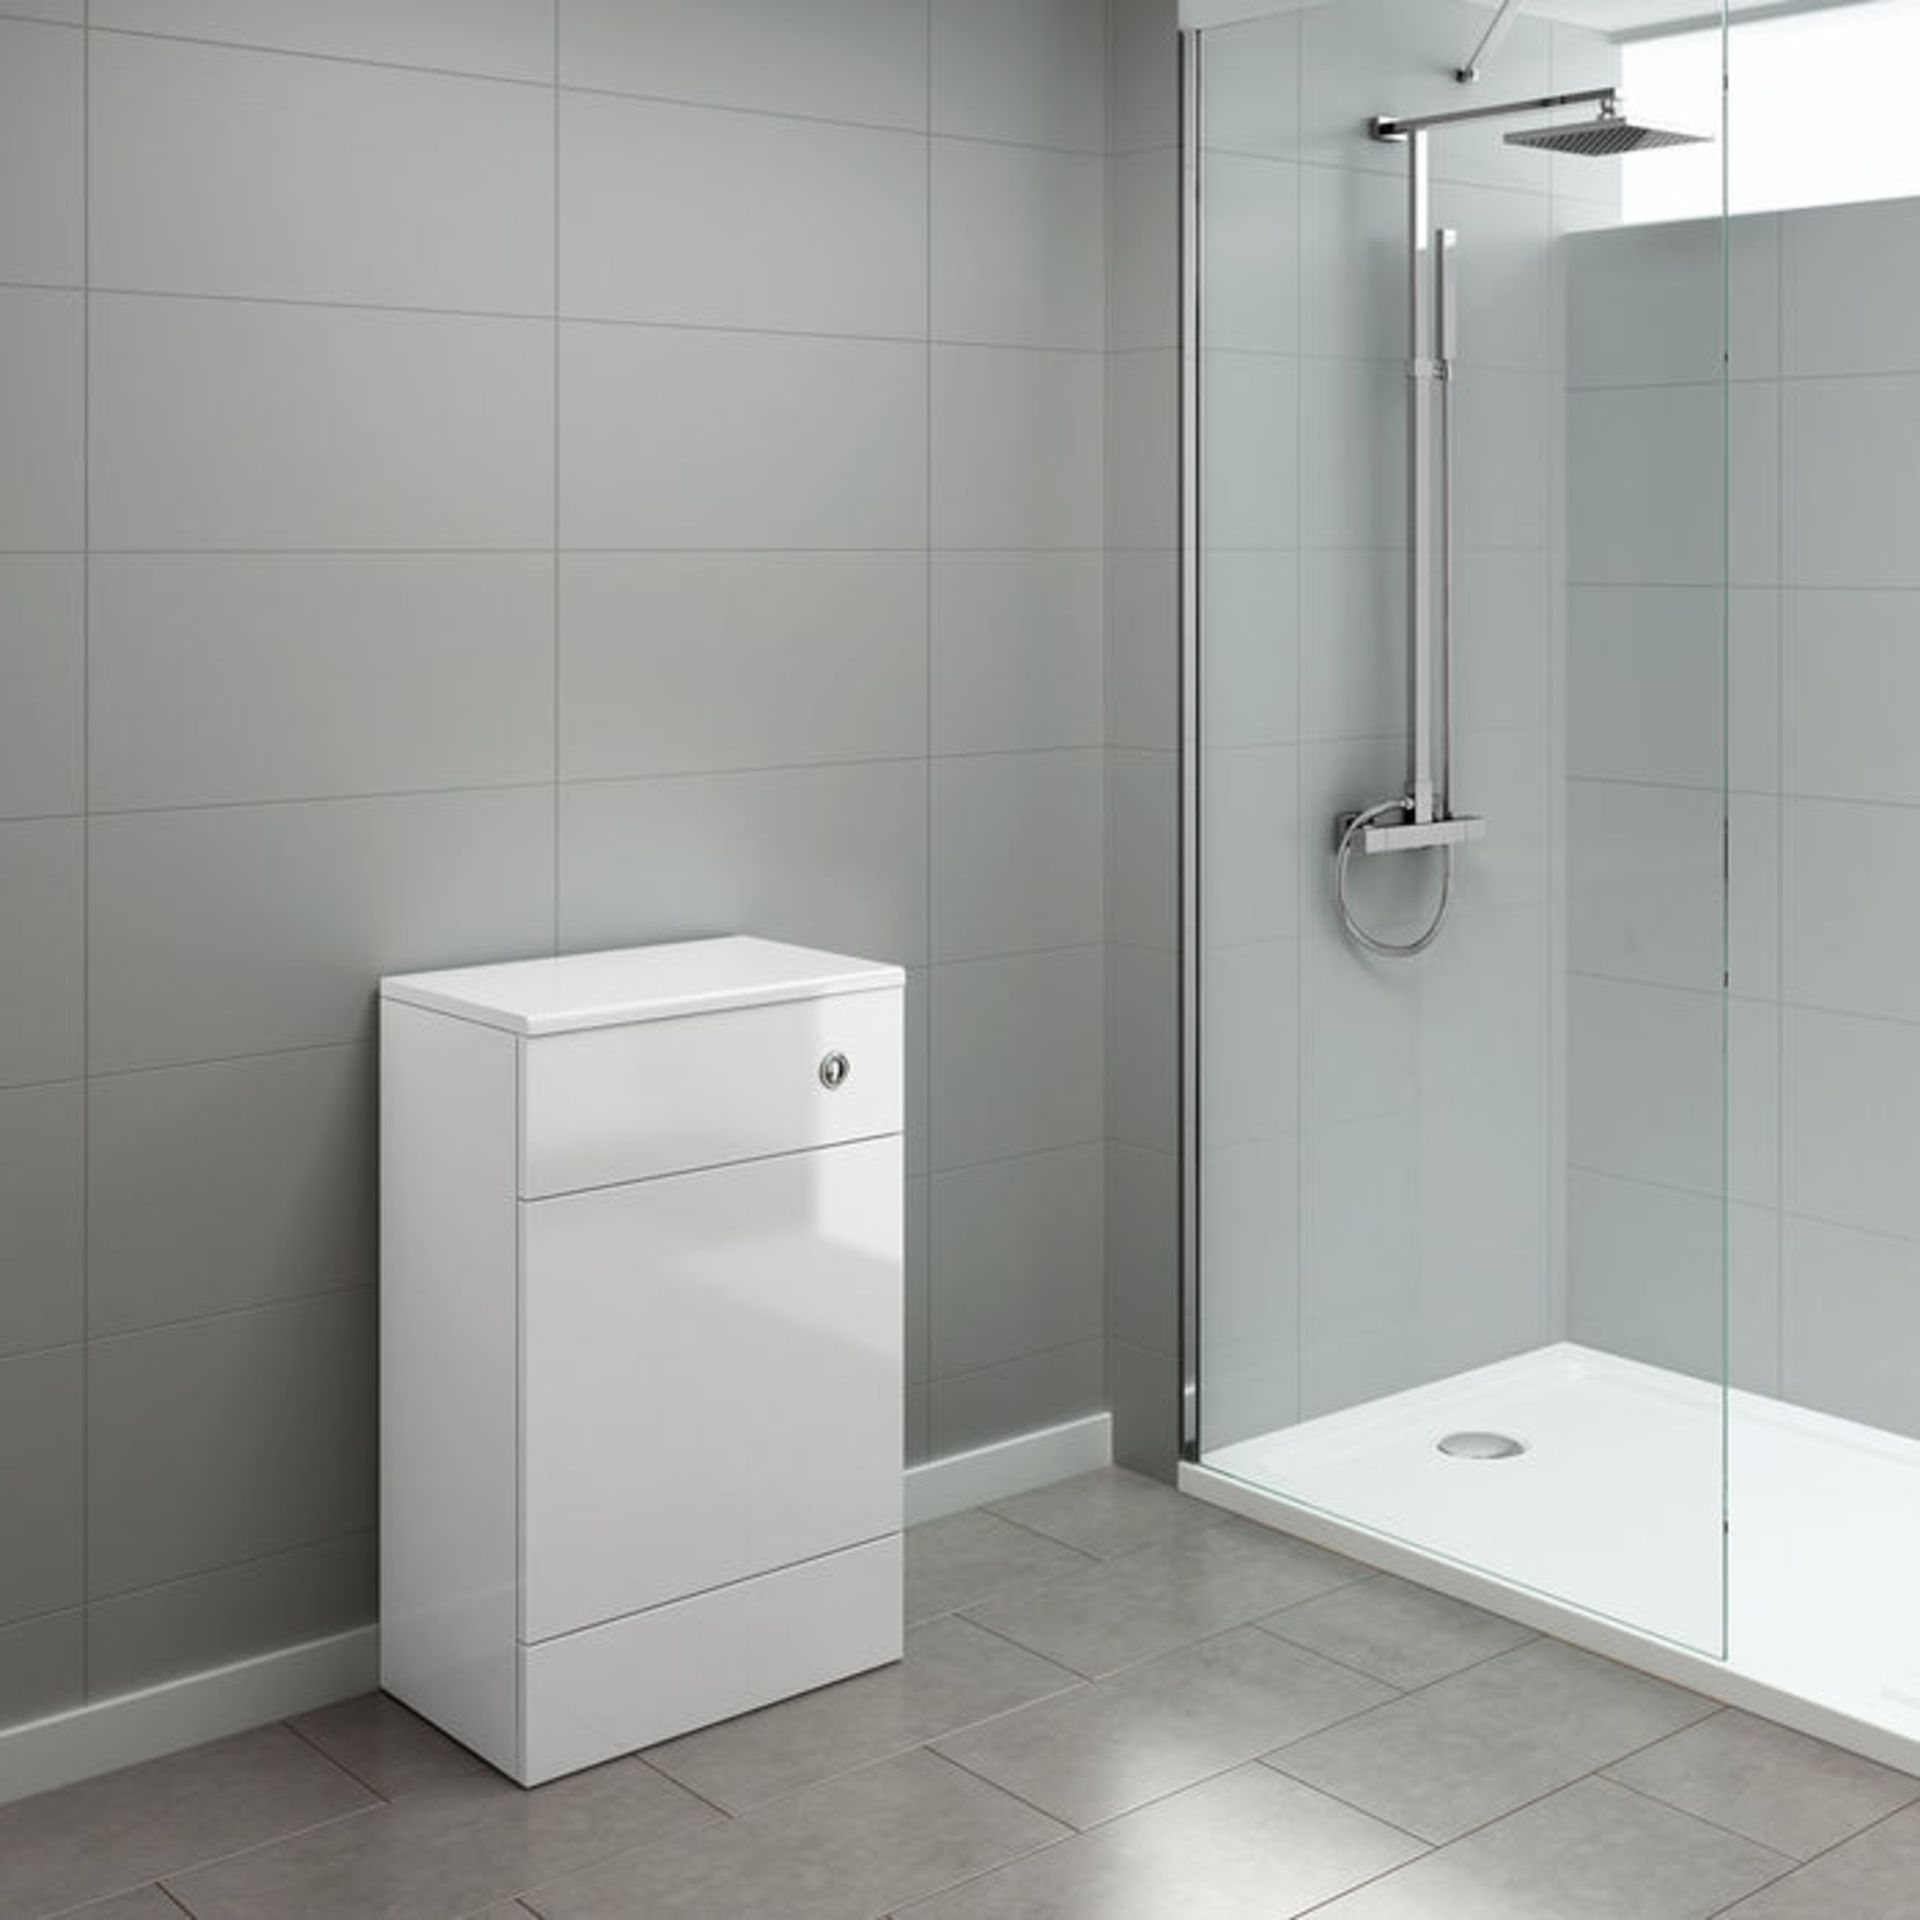 (G81) 500mm Harper Gloss White Back To Wall Toilet Unit RRP £174.99 Our discreet unit cleverly - Image 2 of 4